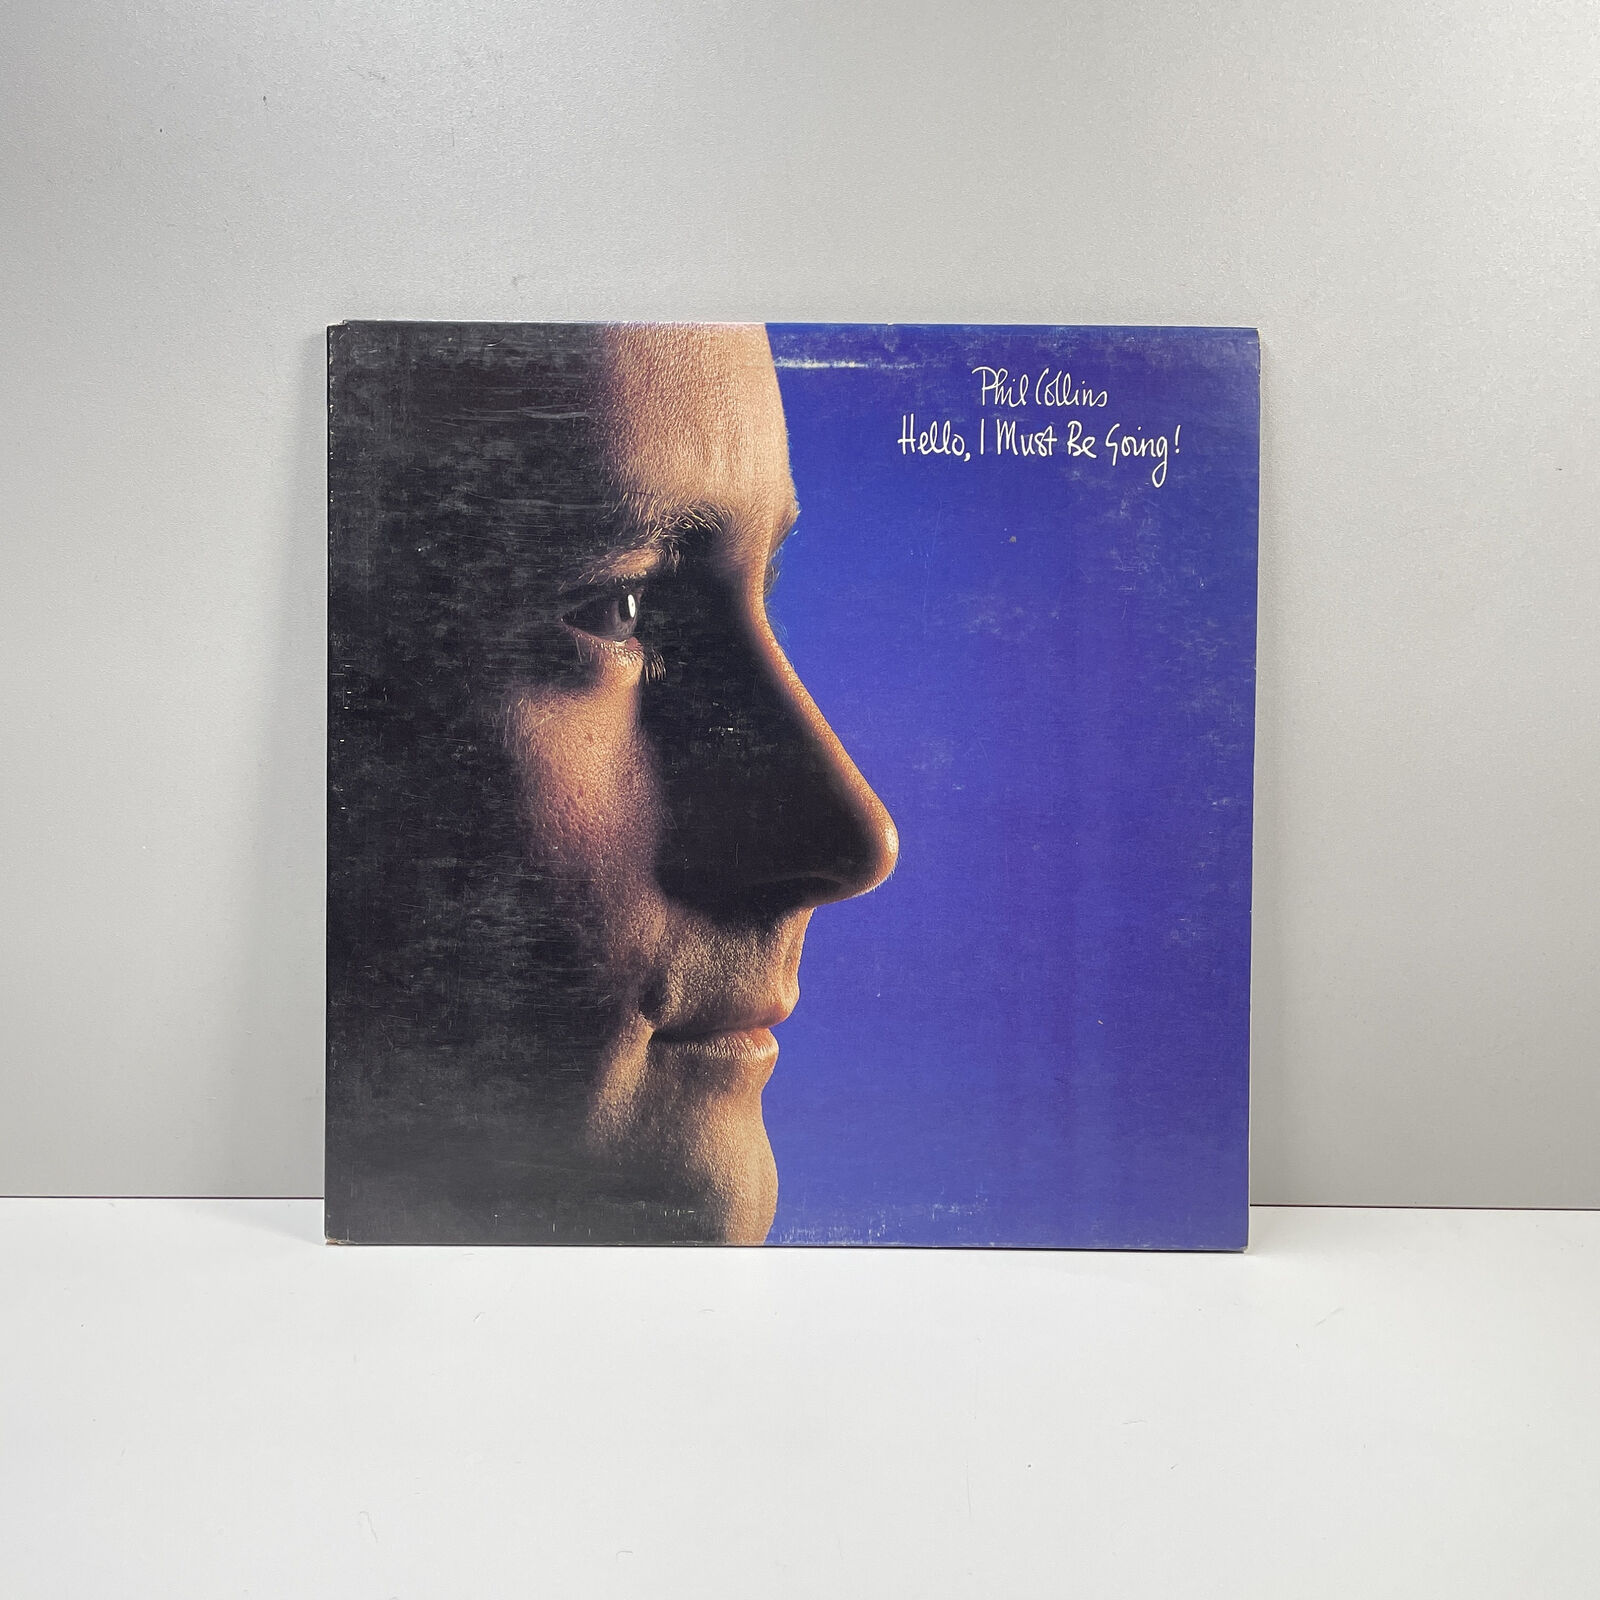 Phil Collins - Hello, I Must Be Going - Vinyl LP Record - 1982